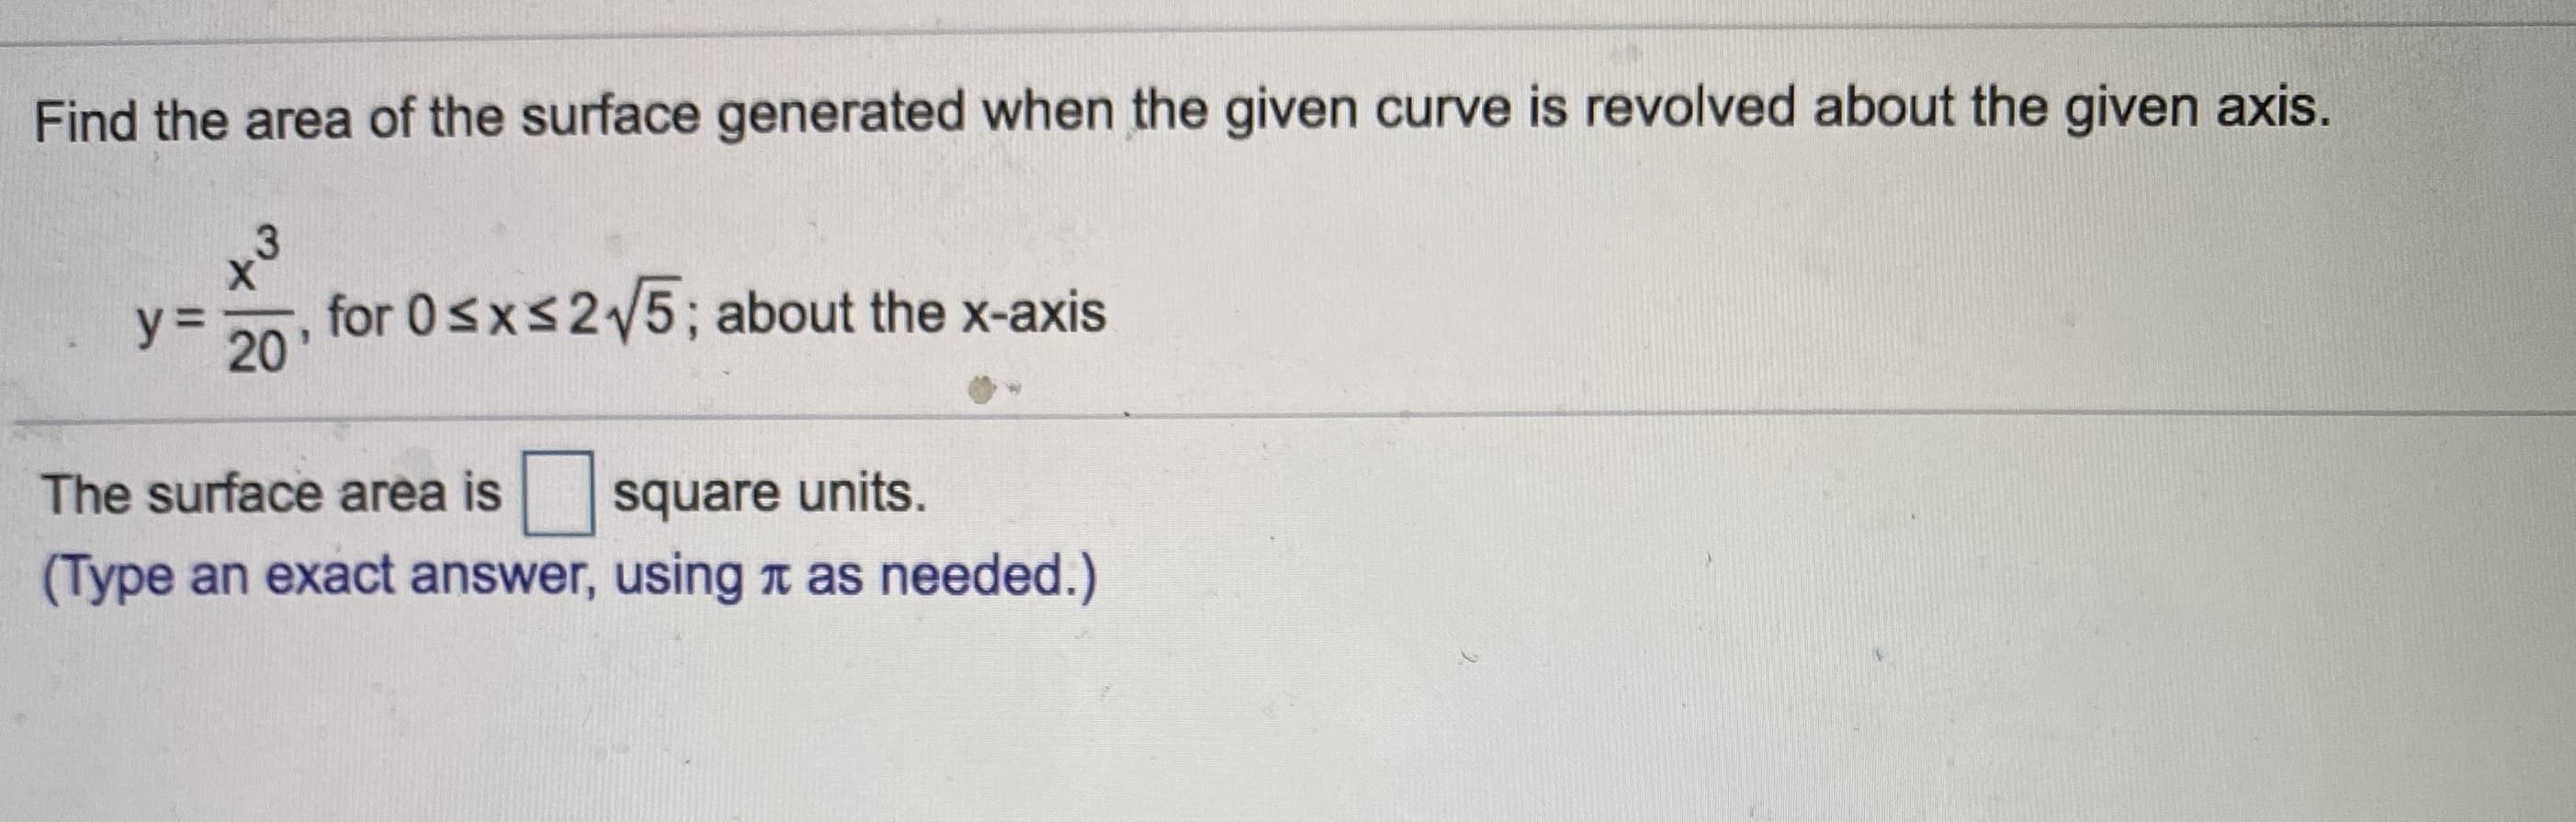 Find the area of the surface generated when the given curve is revolved about the given axis.
y=
for 0sxs25; about the x-axis
20
The surface area is
square units.
(Type an exact answer, using n as needed.)
